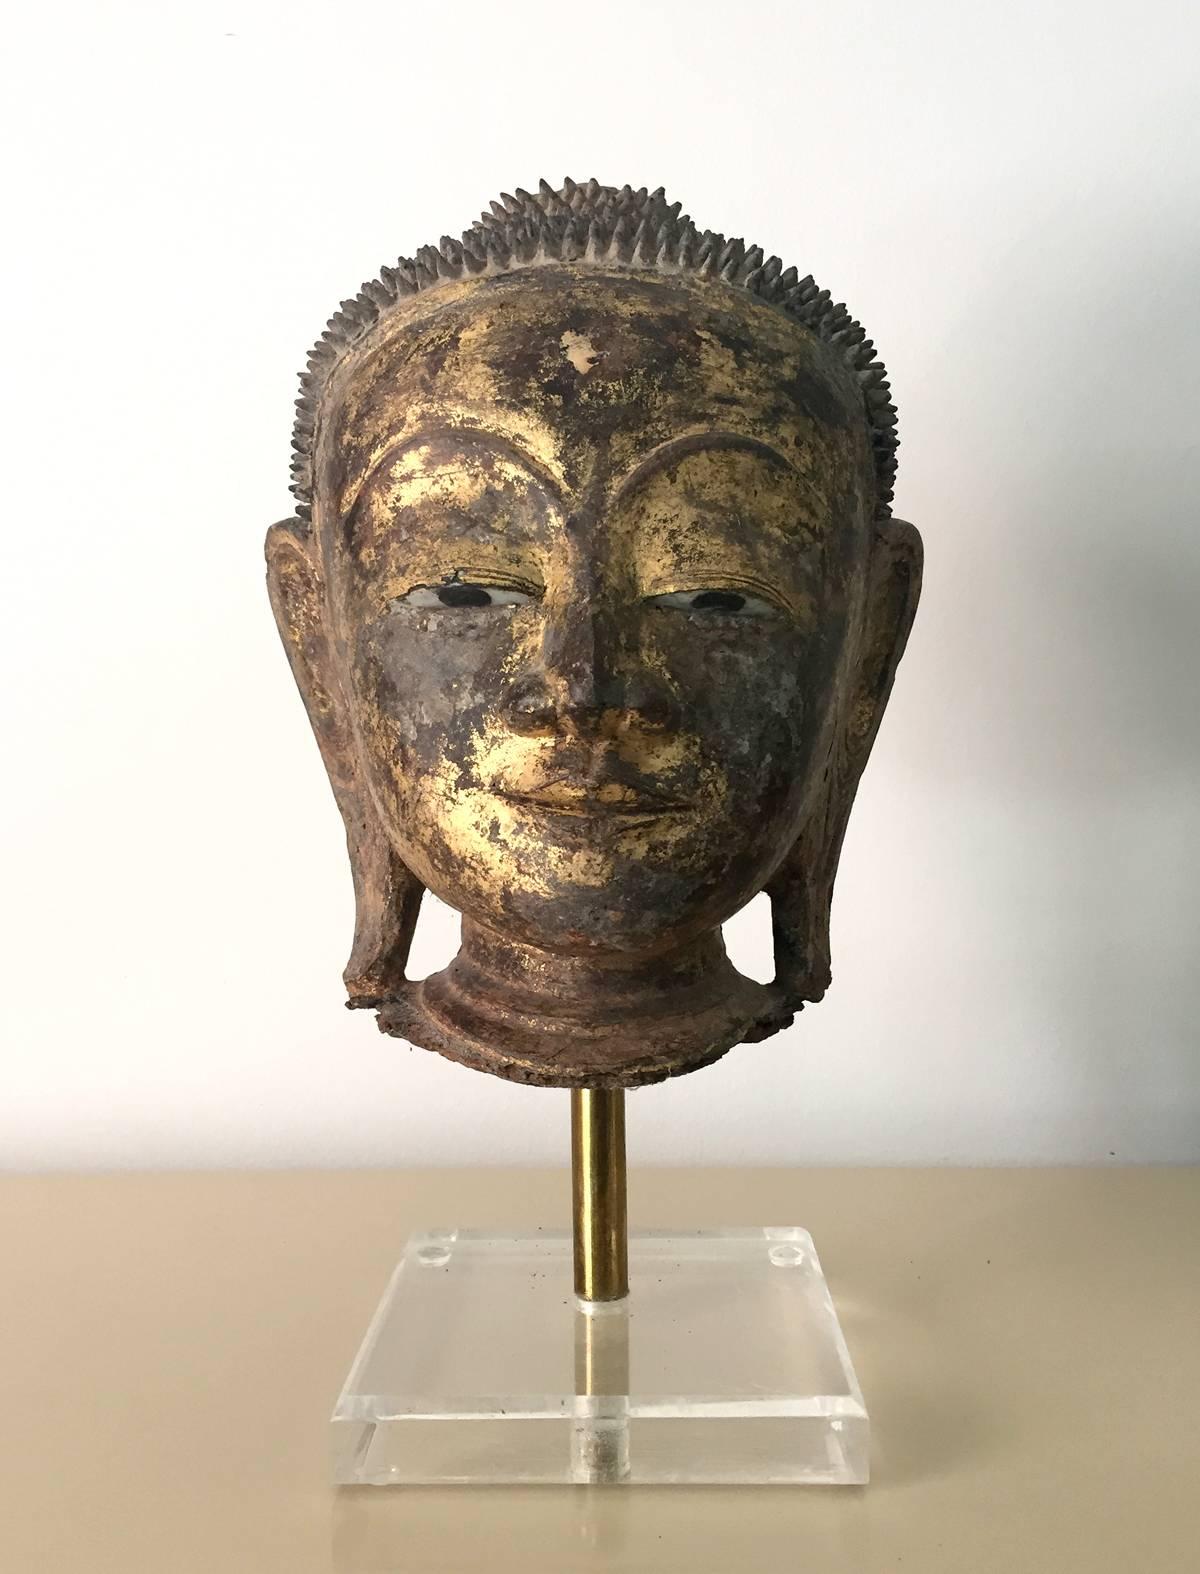 An gilt and lacquered wood Buddha head with displayed on a metal and Lucite stand. stunning presence with its refined features and amazing details. The carving is of exquisite quality. The eyes were inlaid with contrasting marbles. The icon features